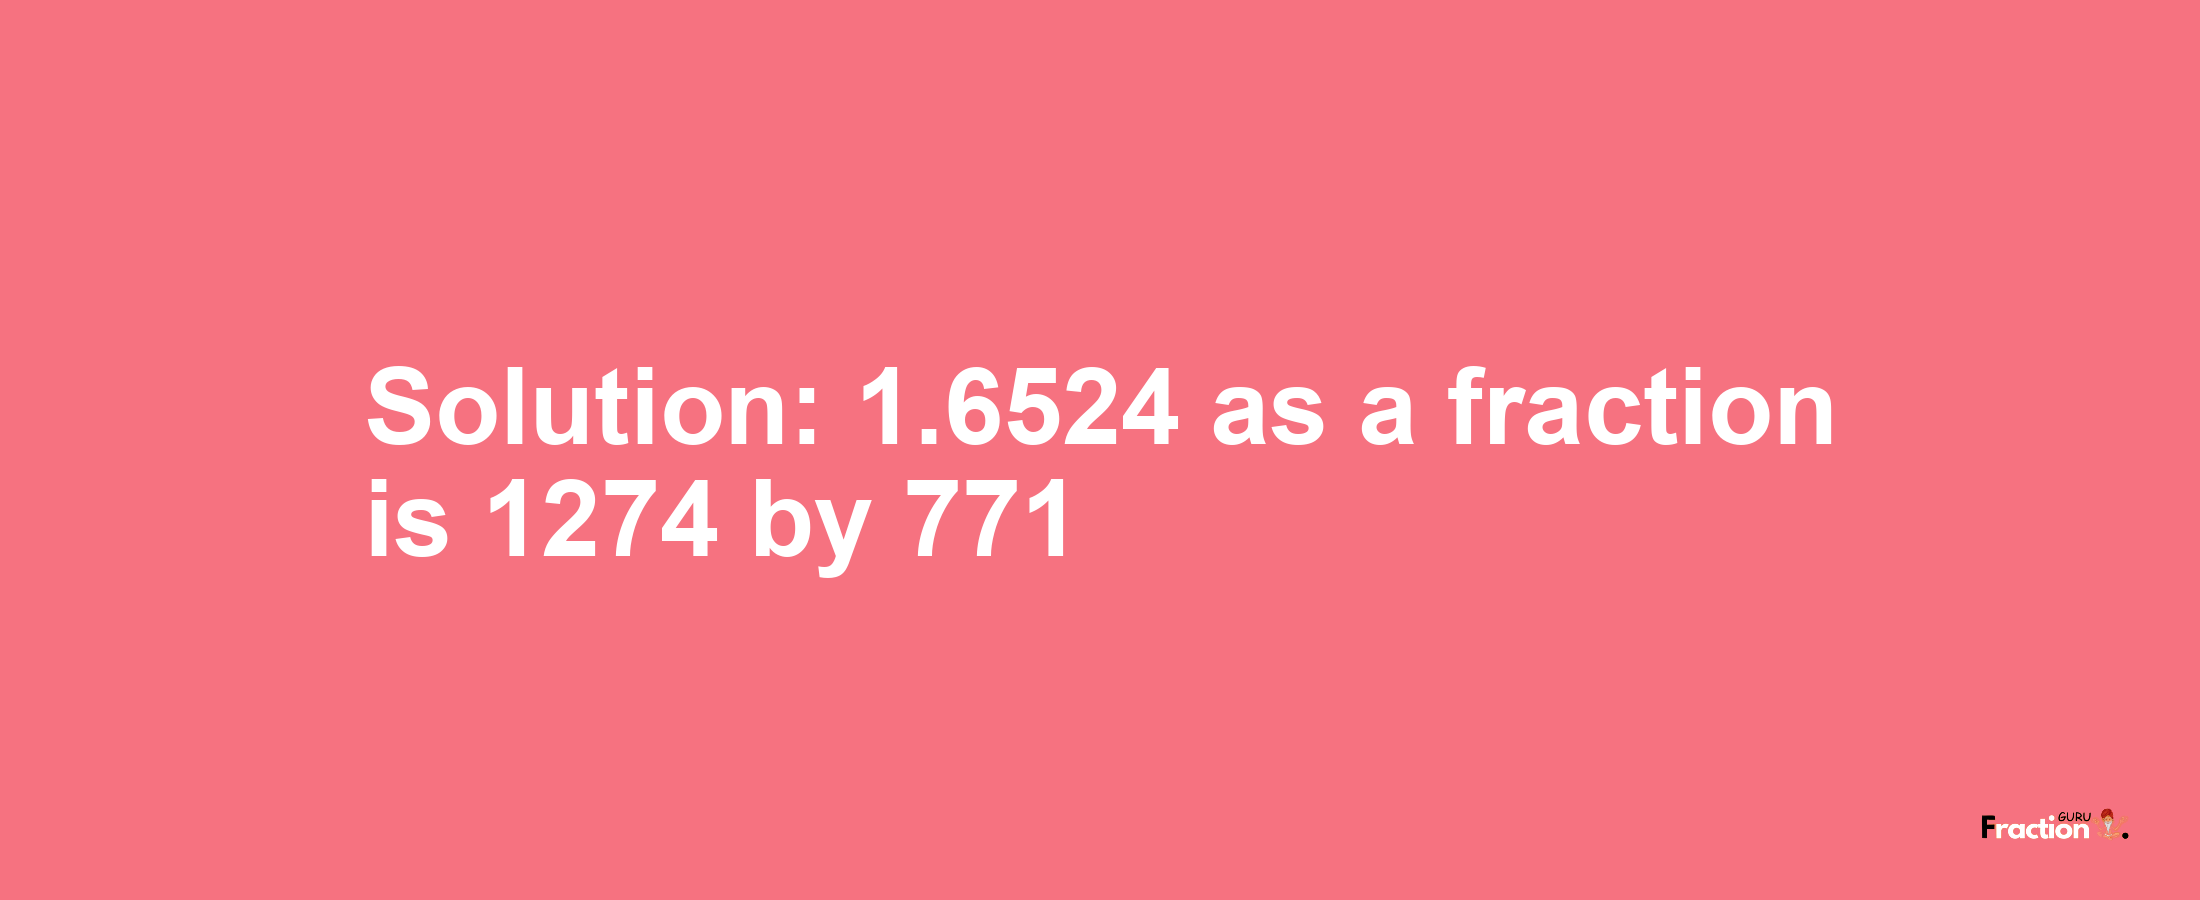 Solution:1.6524 as a fraction is 1274/771